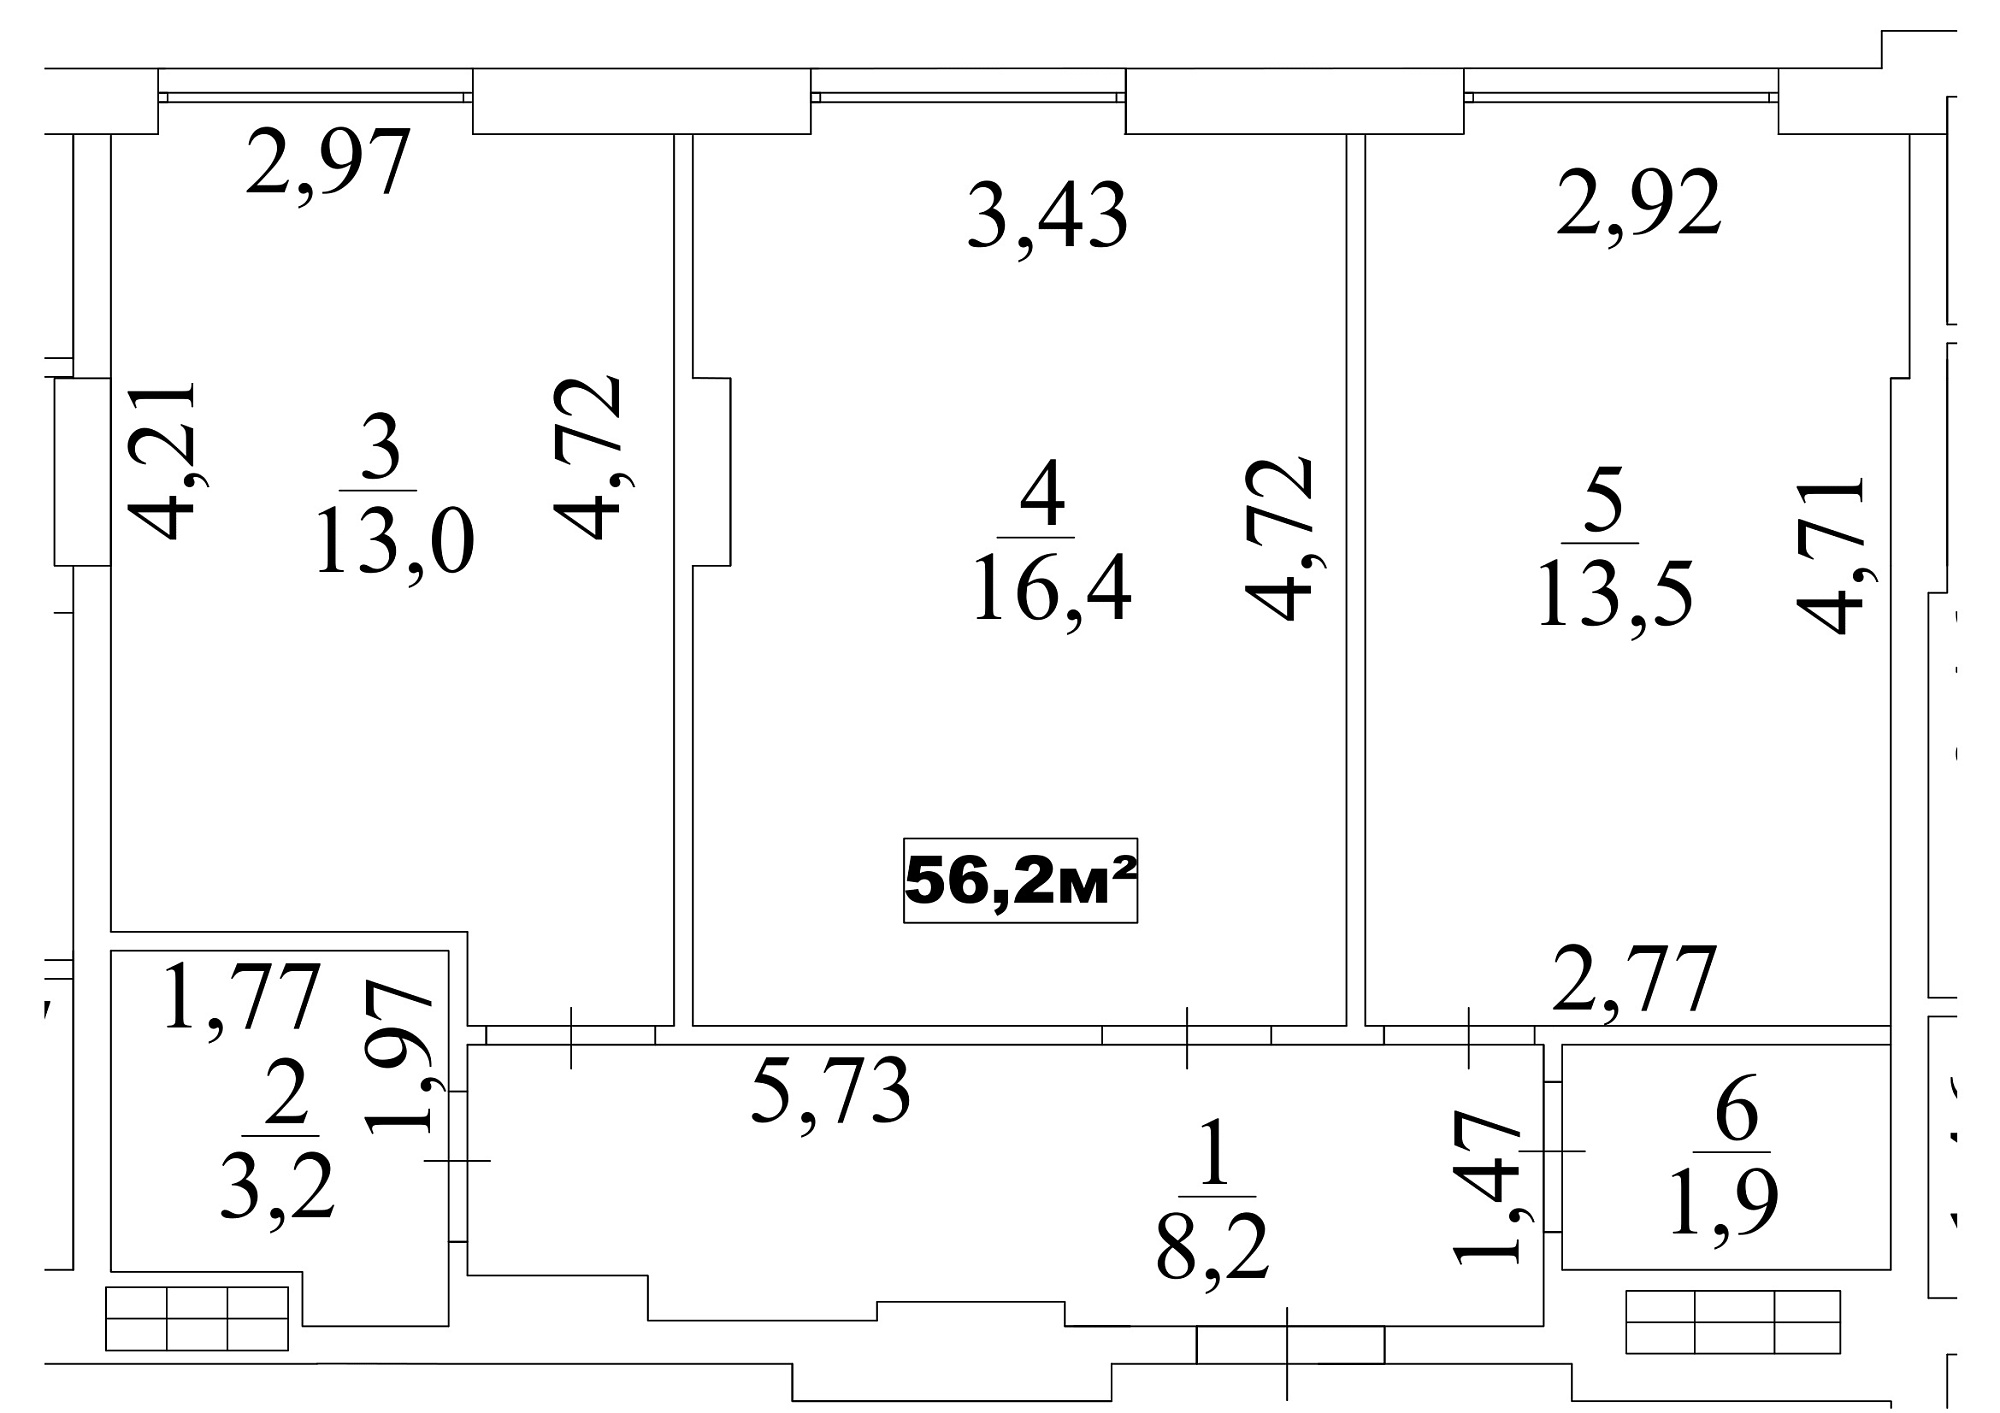 Planning 2-rm flats area 56.2m2, AB-10-05/00040.